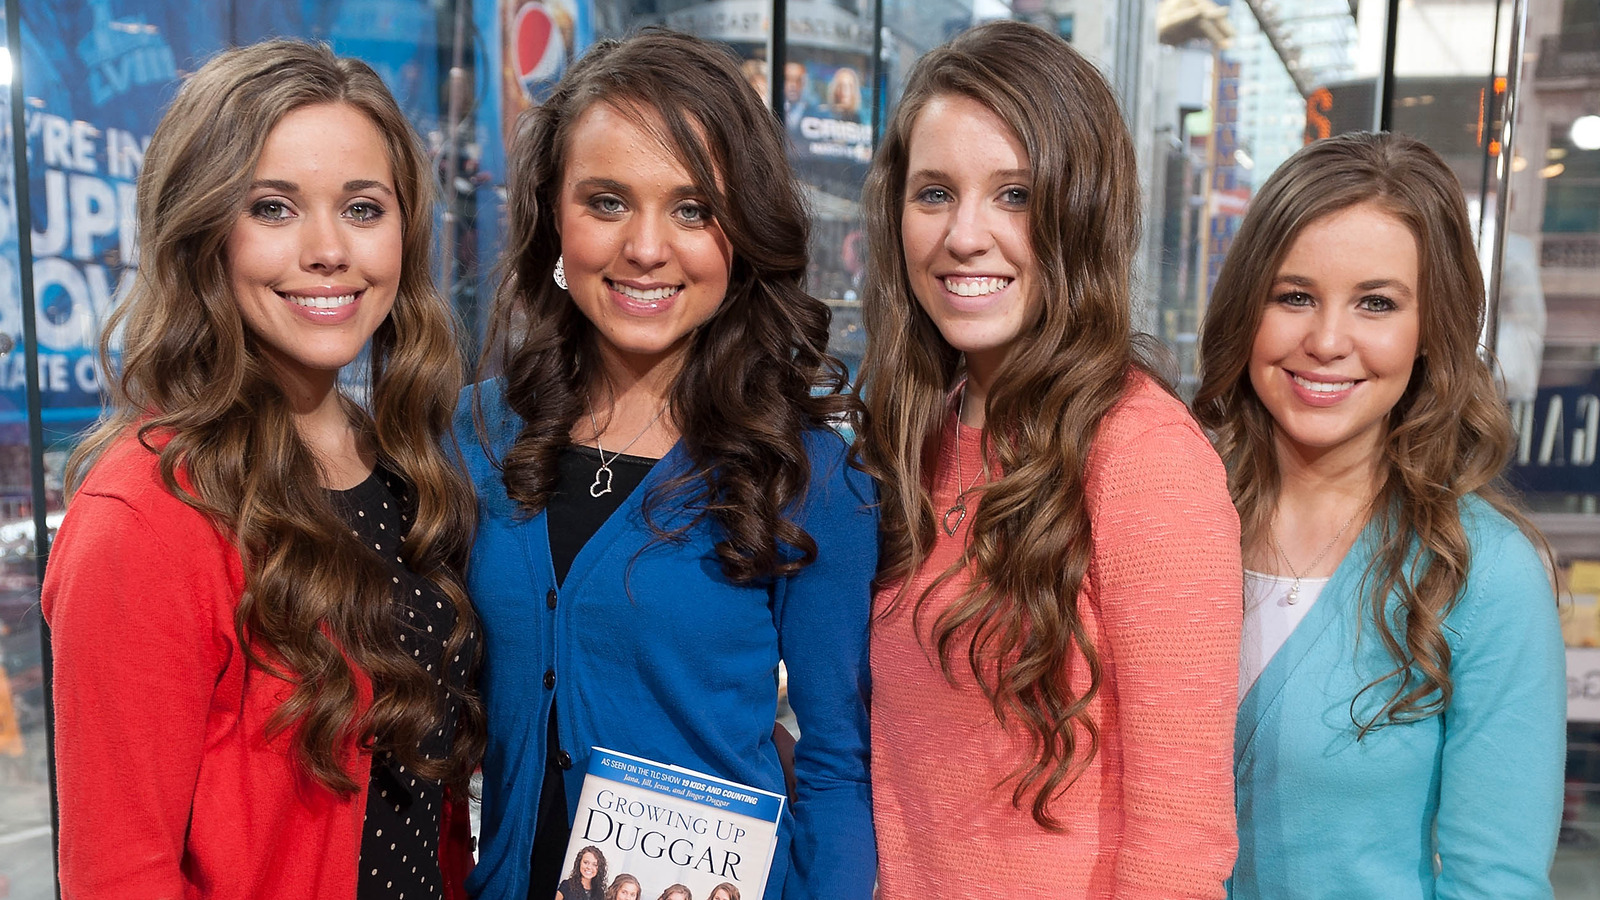 What Do The Duggars Really Think About Divorce?